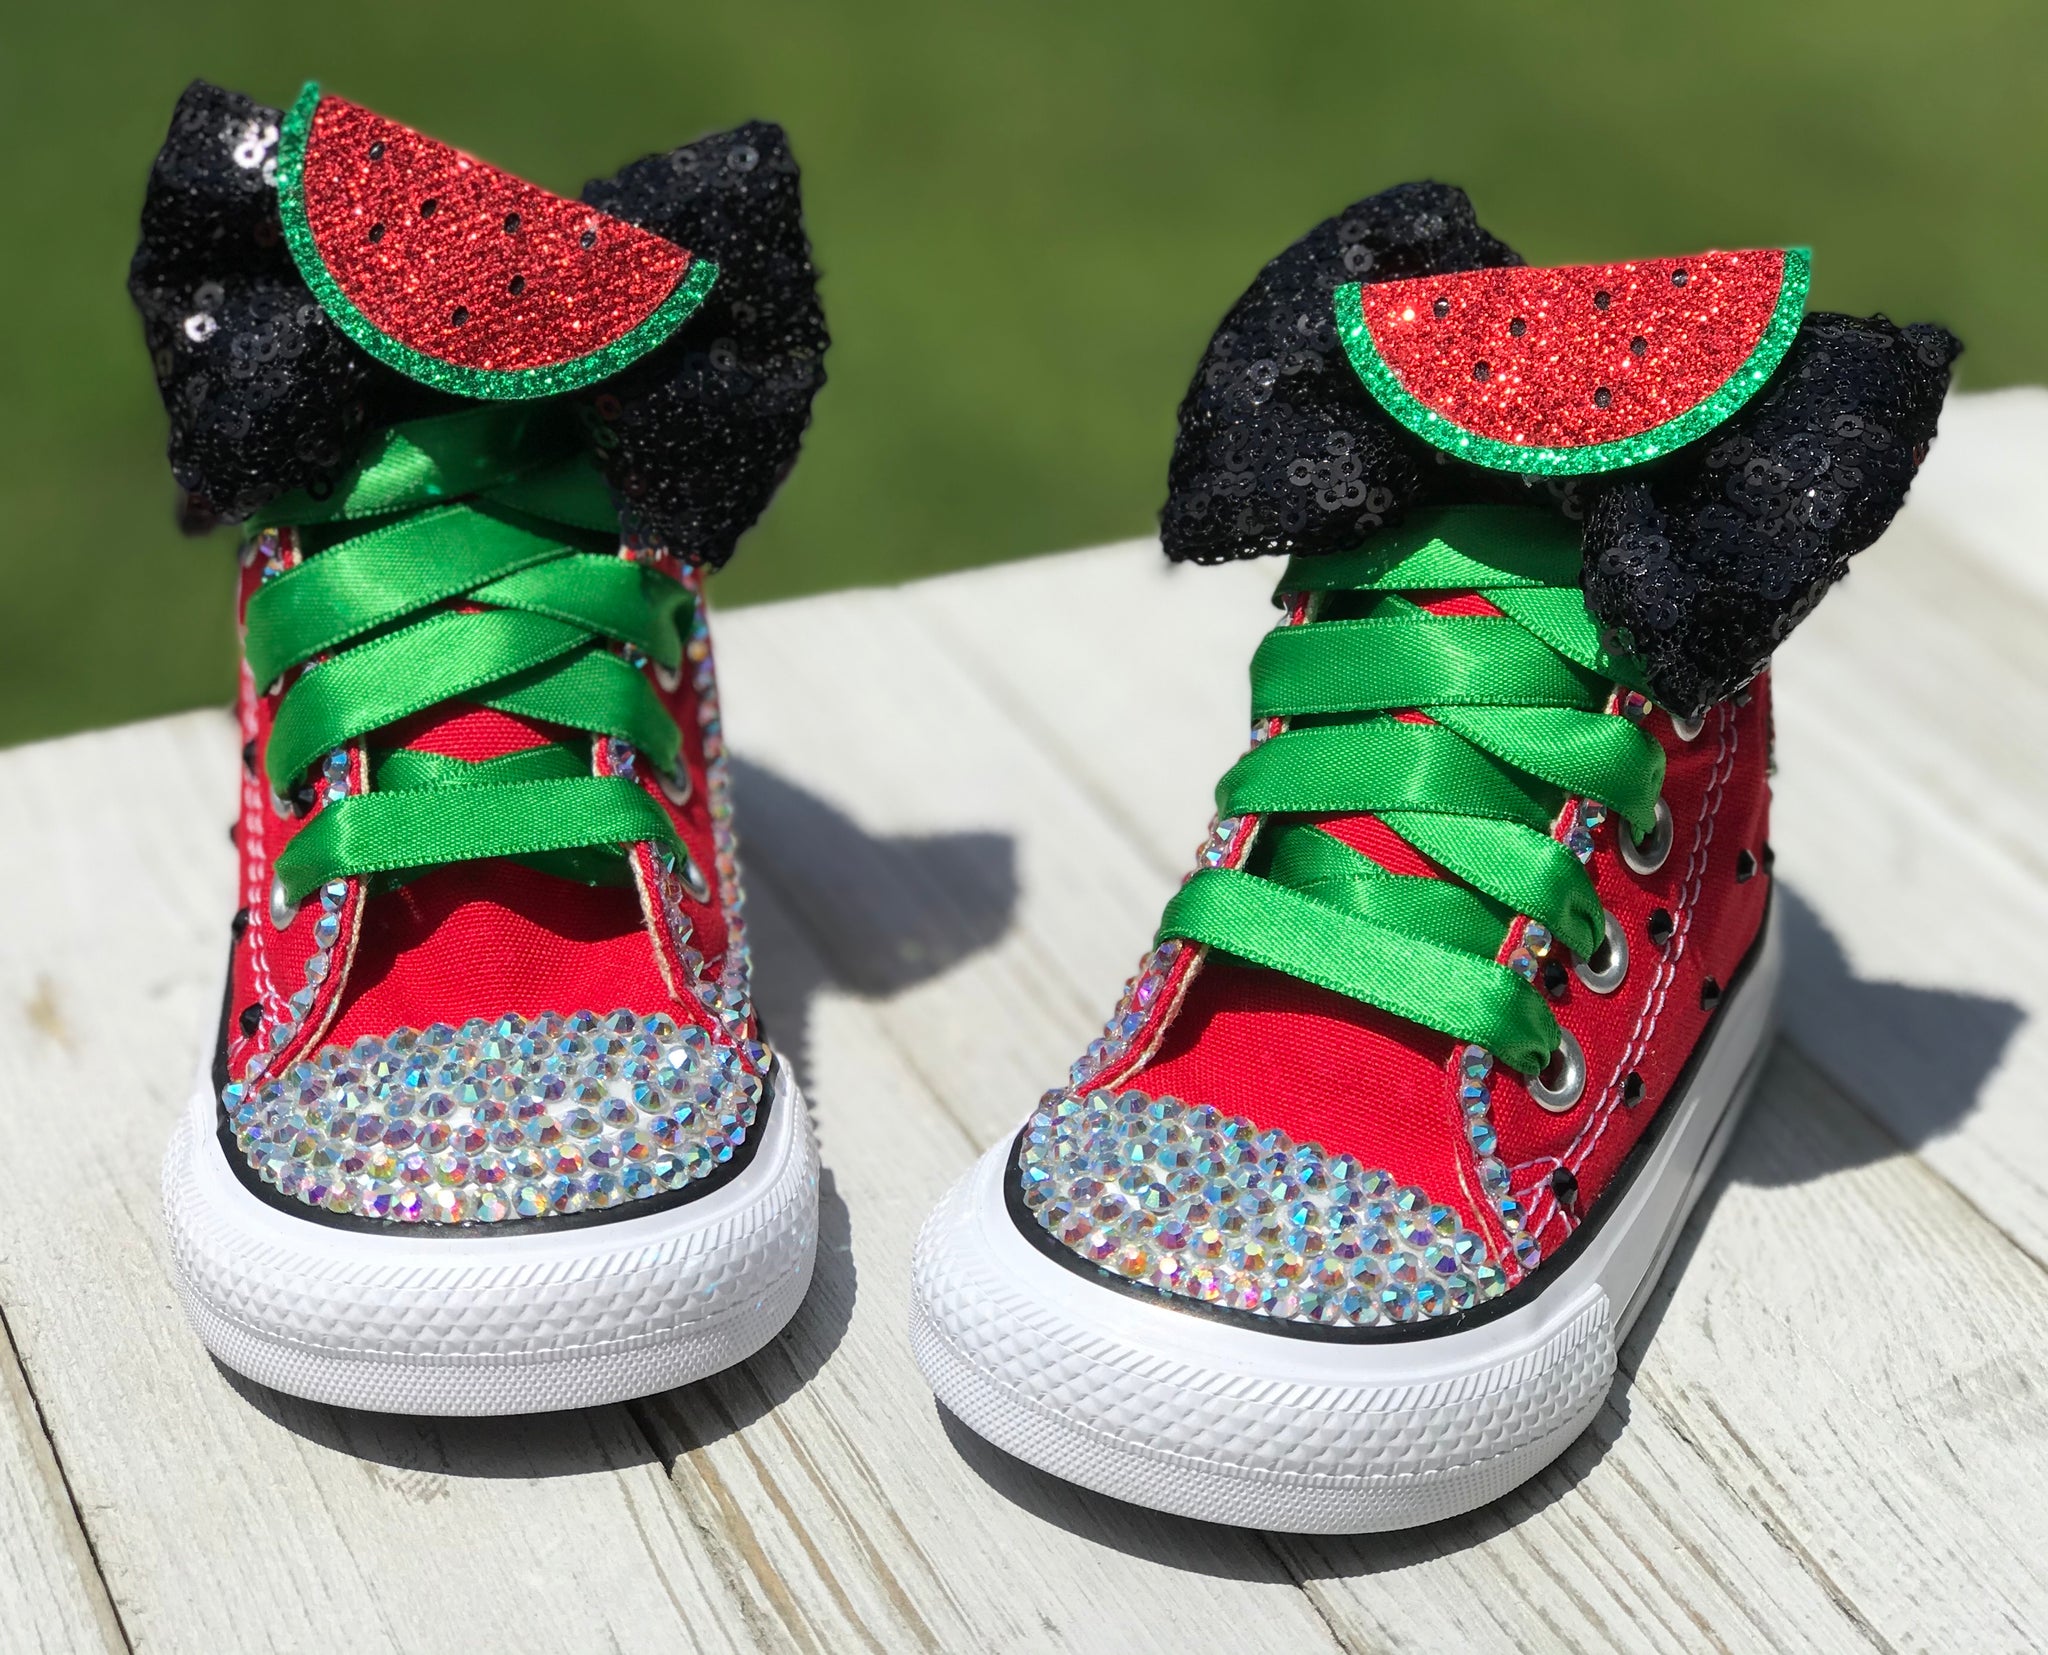 Red Touch of Bling Converse Sneakers, Little Kids Shoe Size 10-2